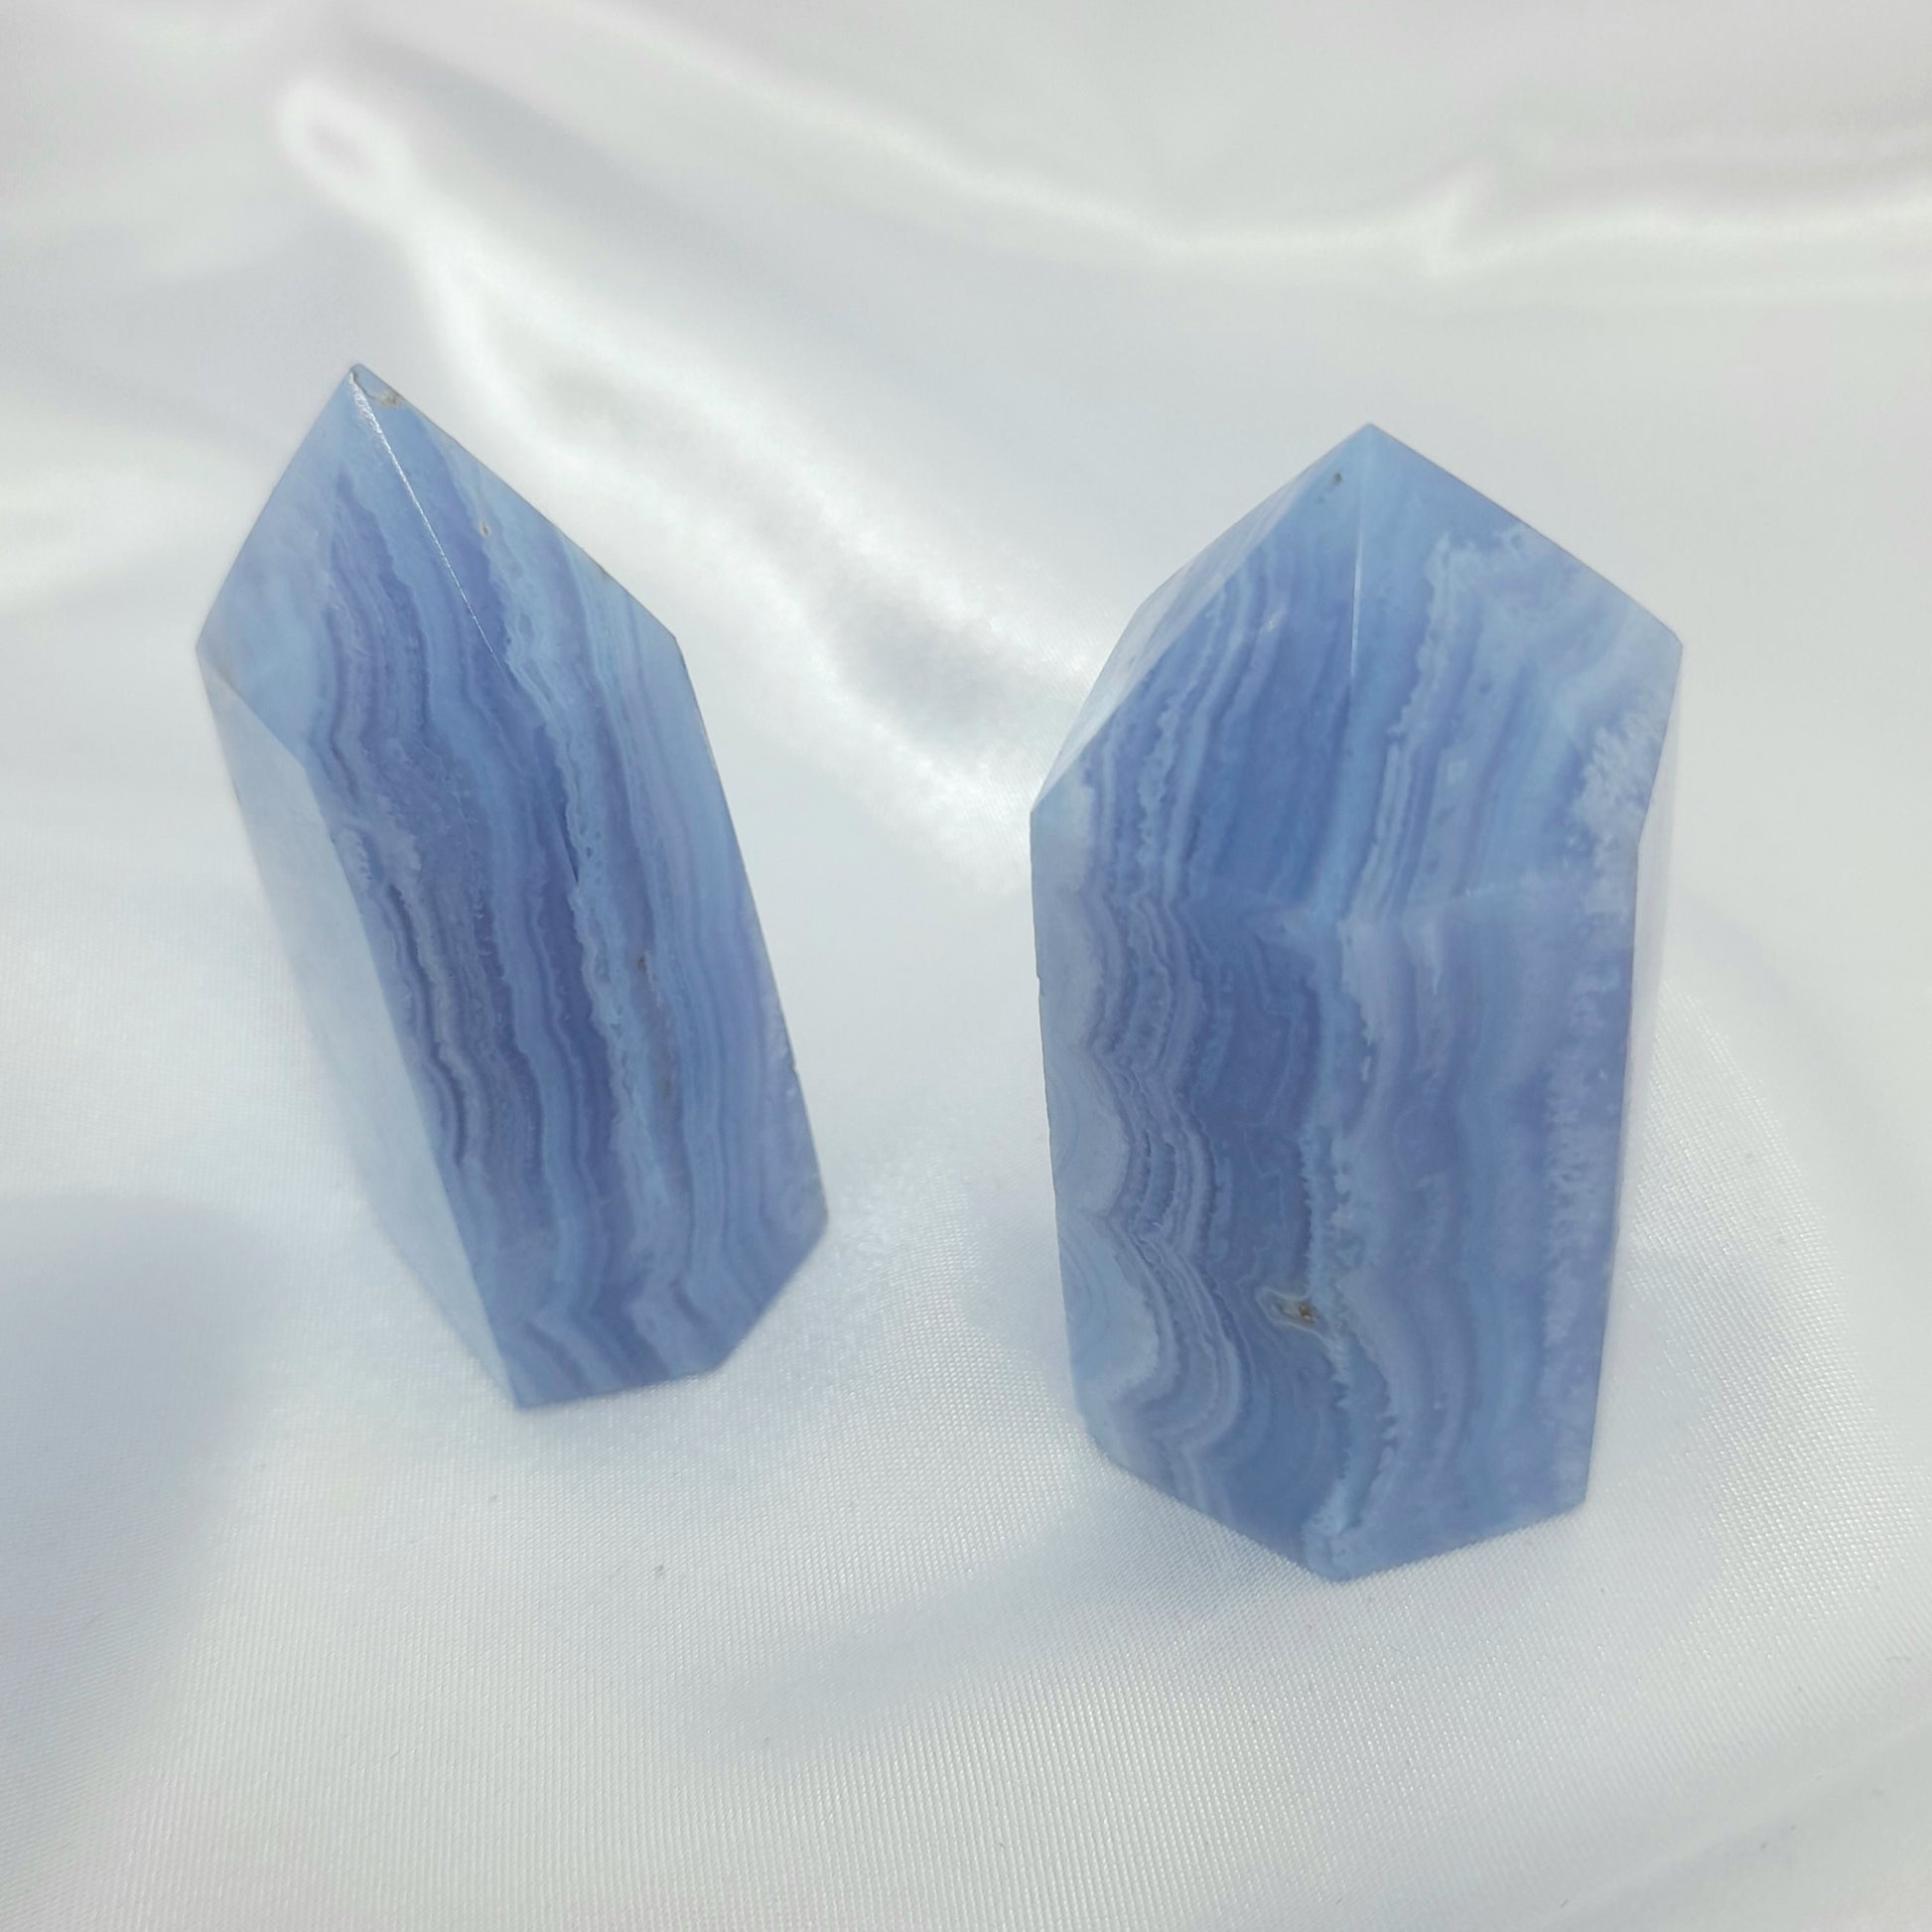 Blue Lace Agate Point - Spiritual Tranquility Crystal, 6cm Size - Alleviates Loneliness and Anxiety, Grounding and Enlightening